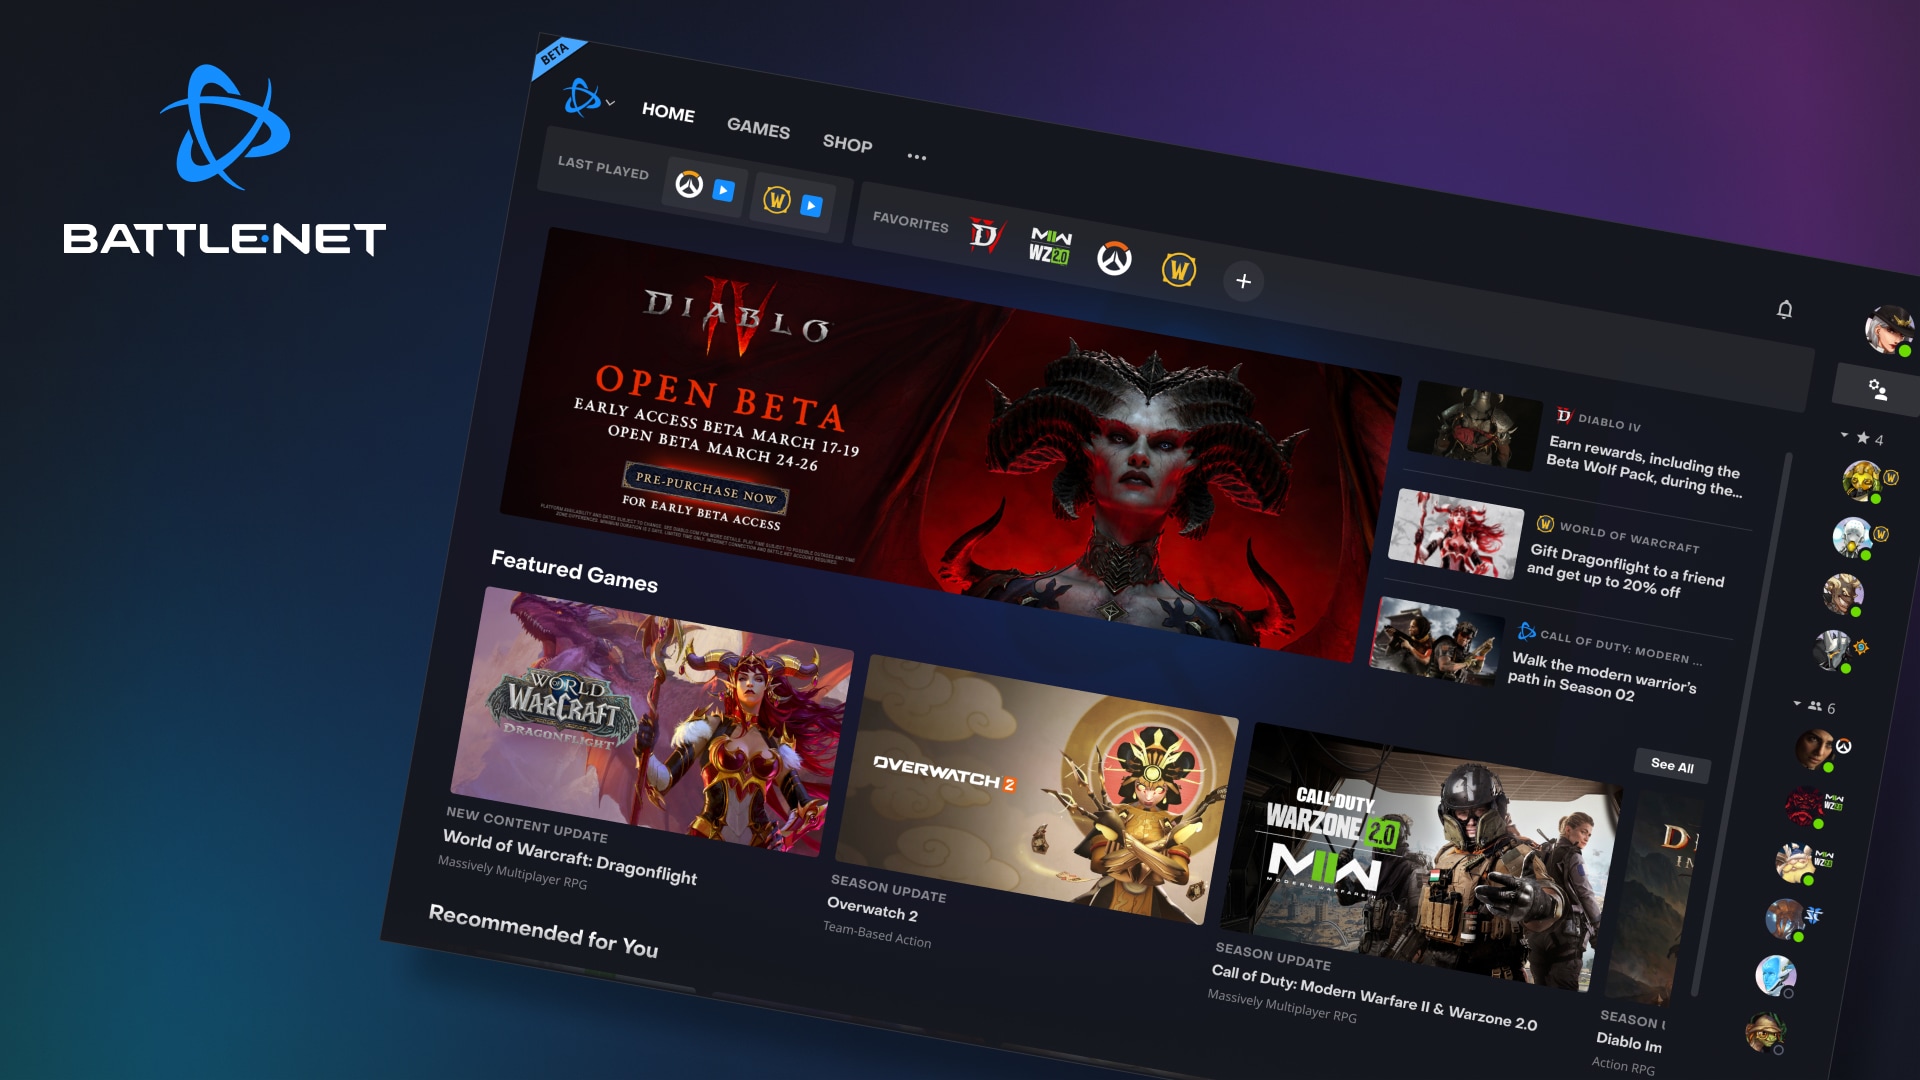 The new Battle.net Home Page is live!